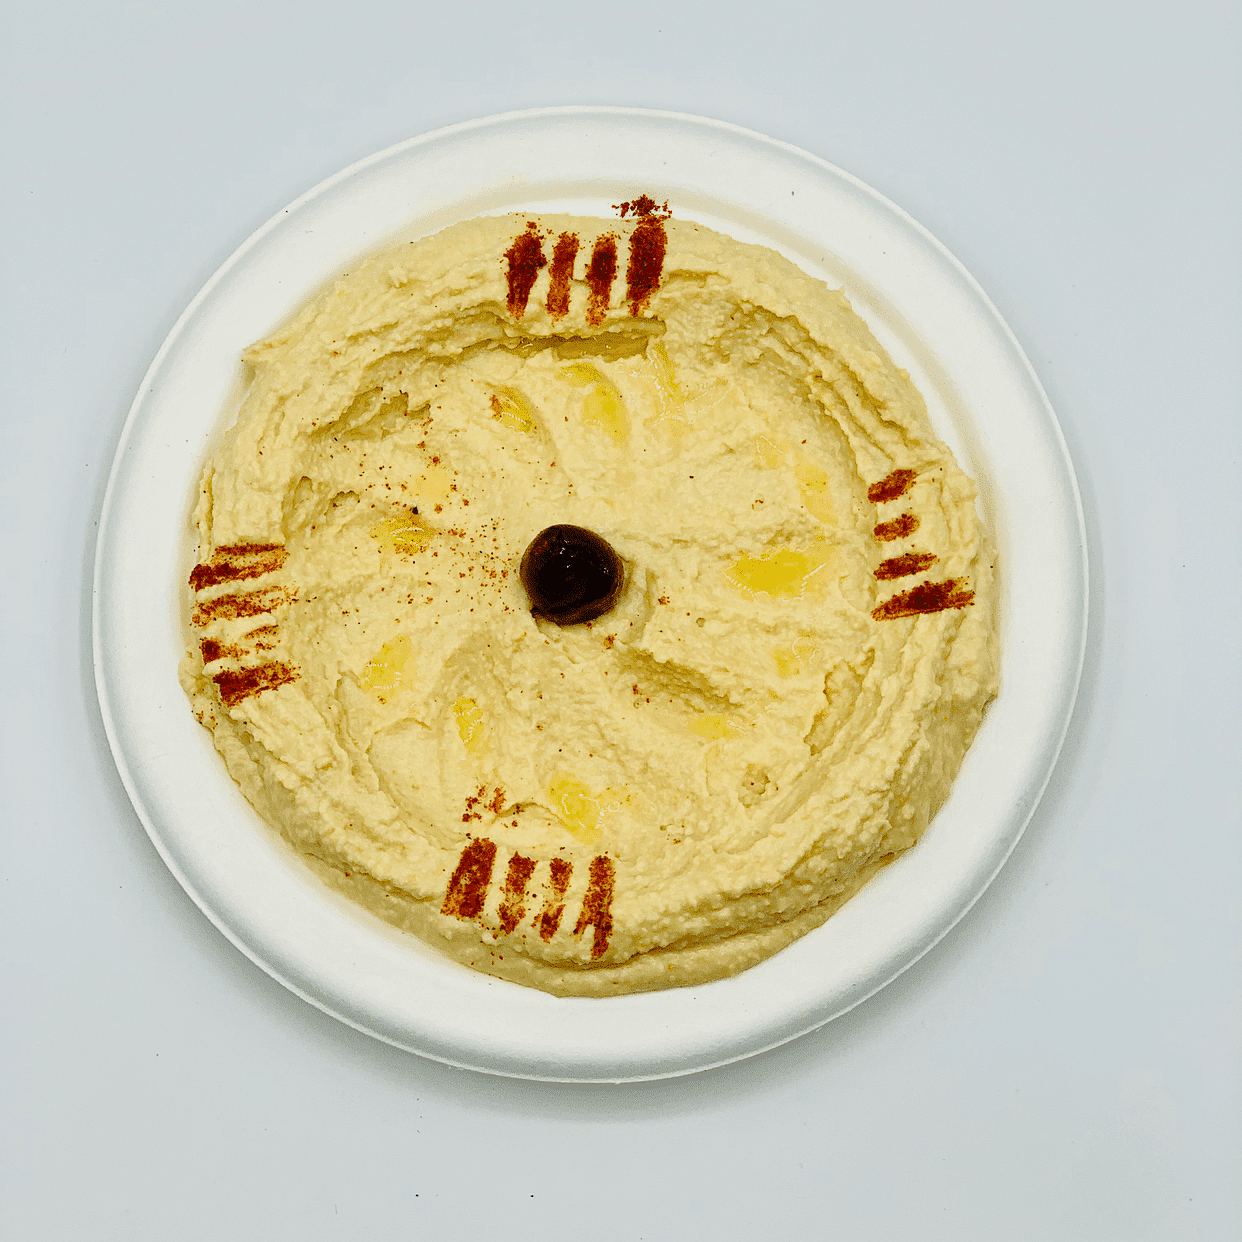 Plate of hummus with olive in the center and spice decoration